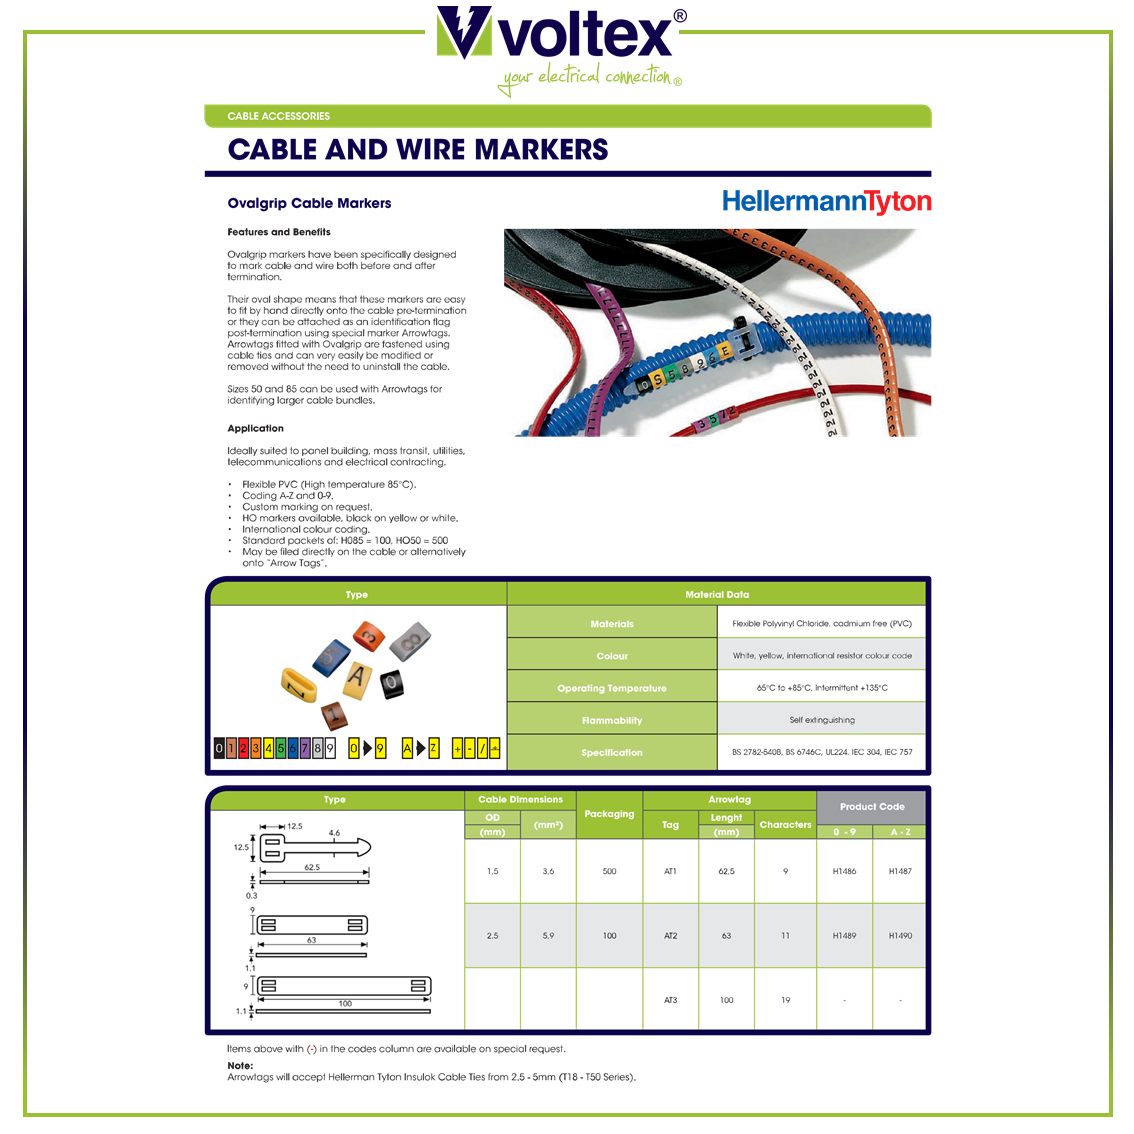 VOLTEX - Cable and Wire Markers Catalogue